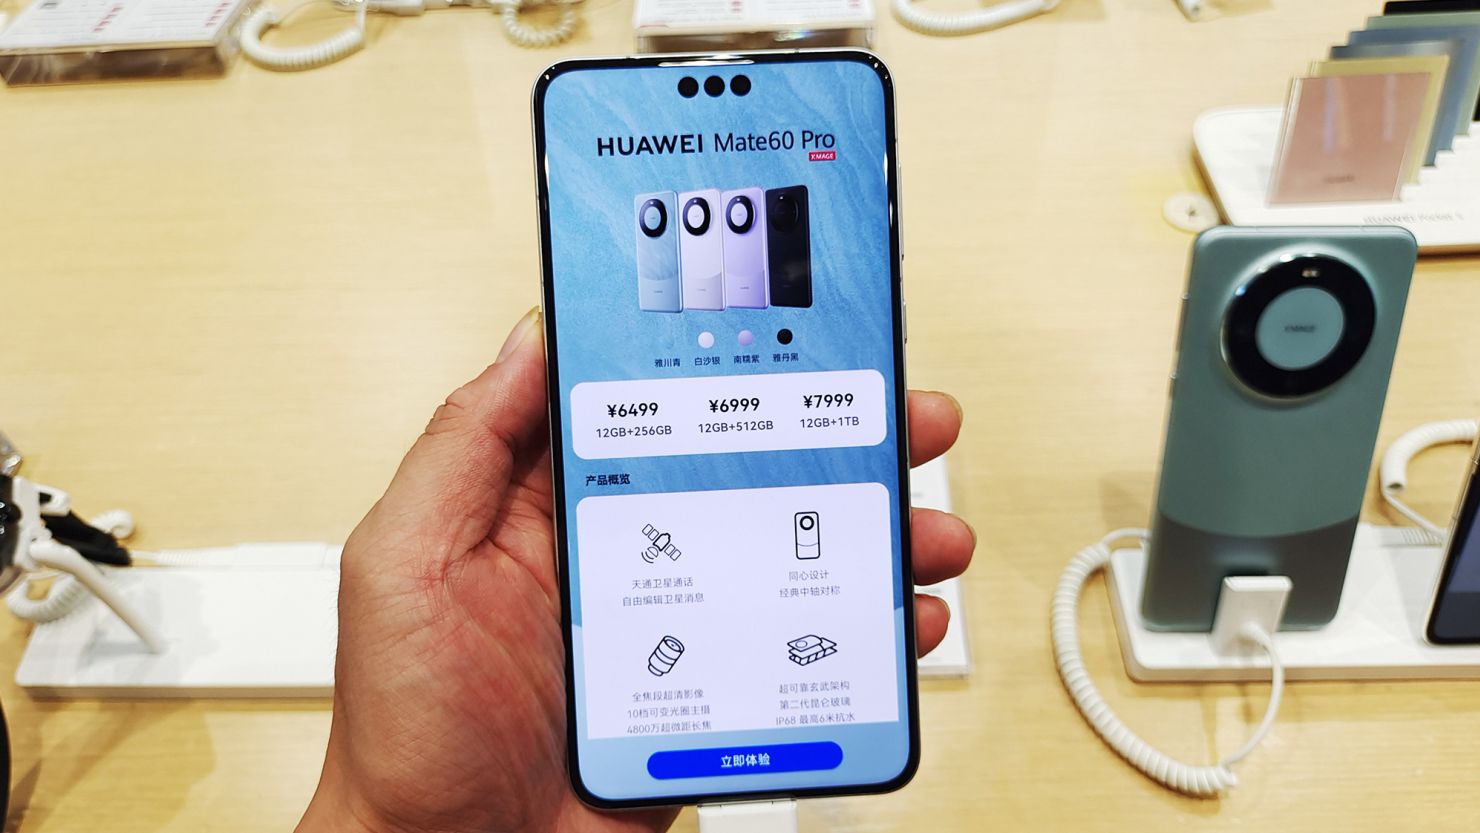 Huawei's Mate 60 Pro shows China has come a long way in chipmaking